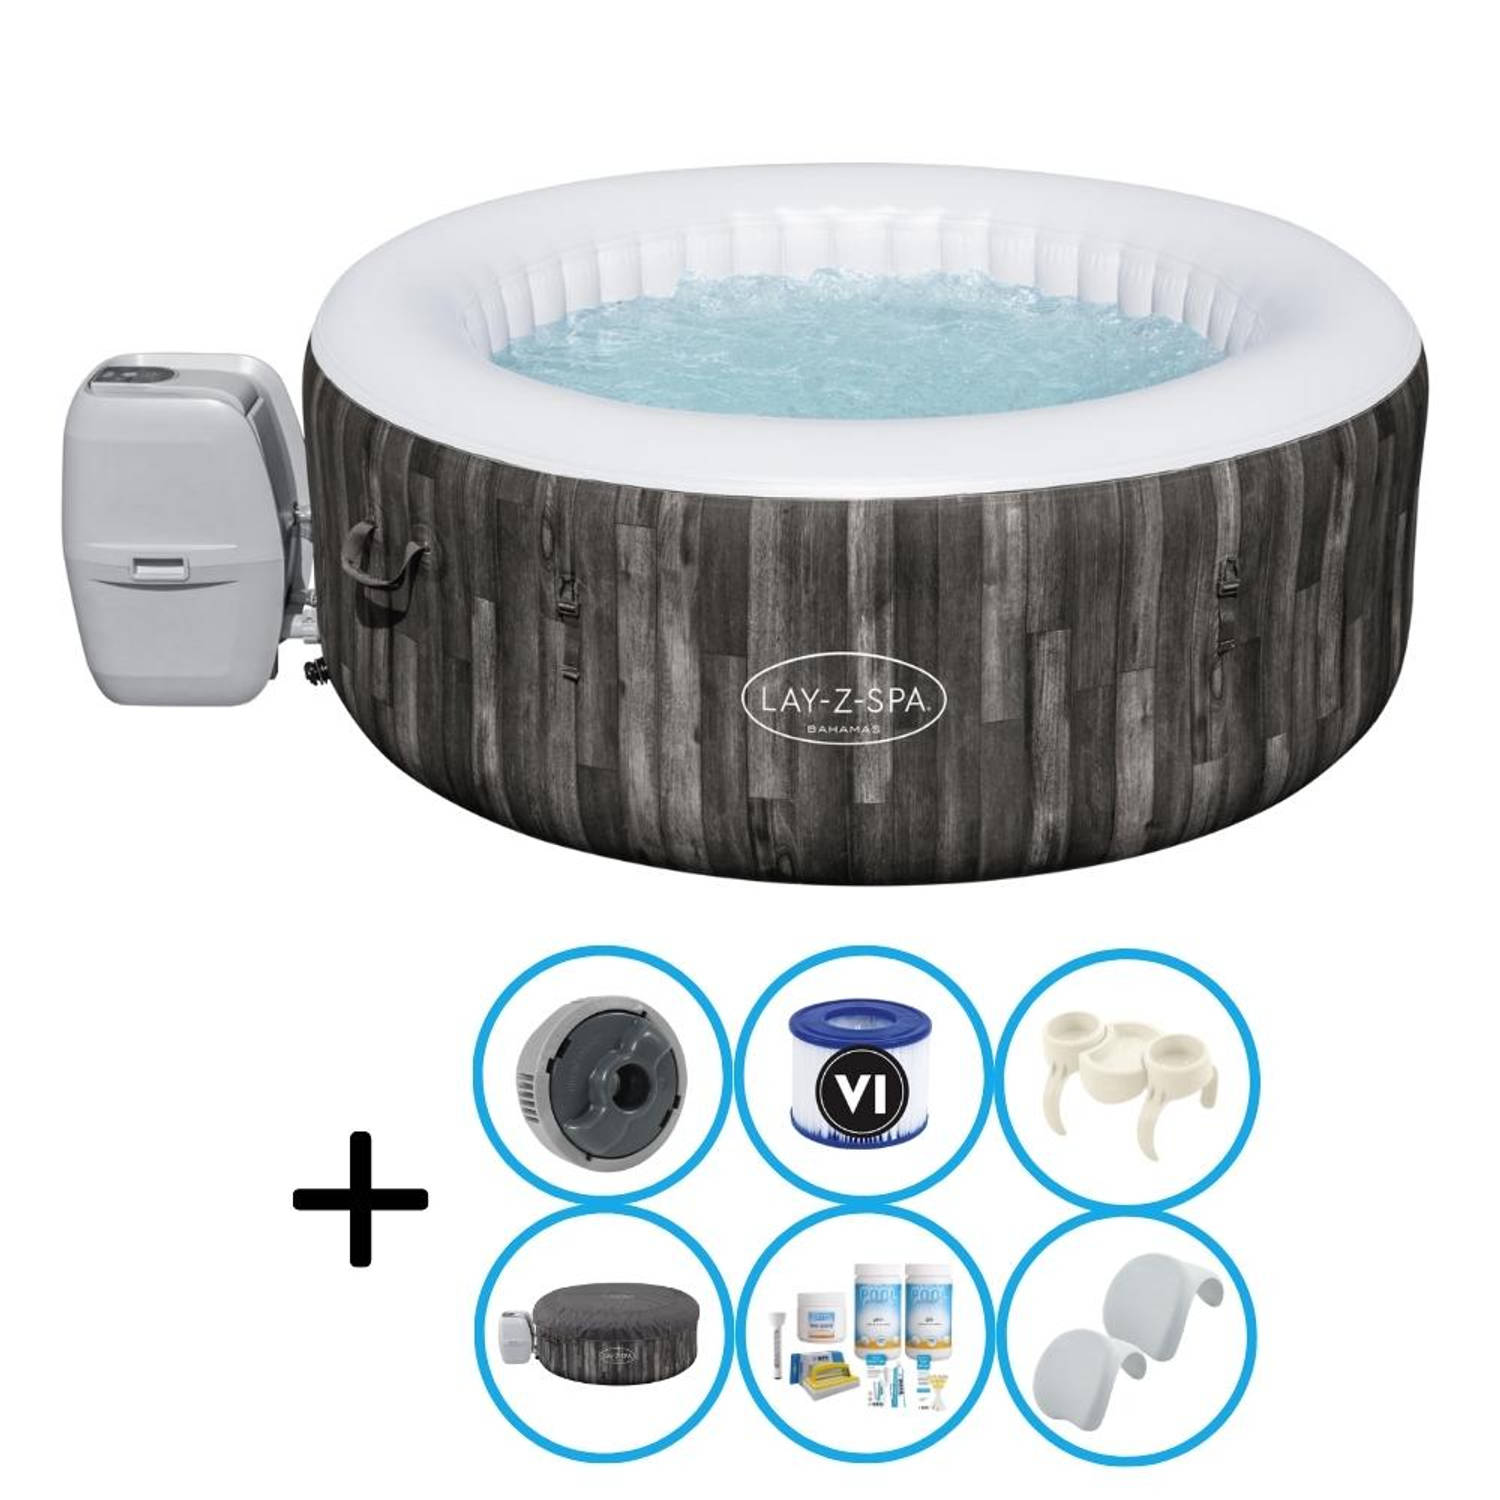 Bestway Jacuzzi Lay z spa Bahama Inclusief Accessoires